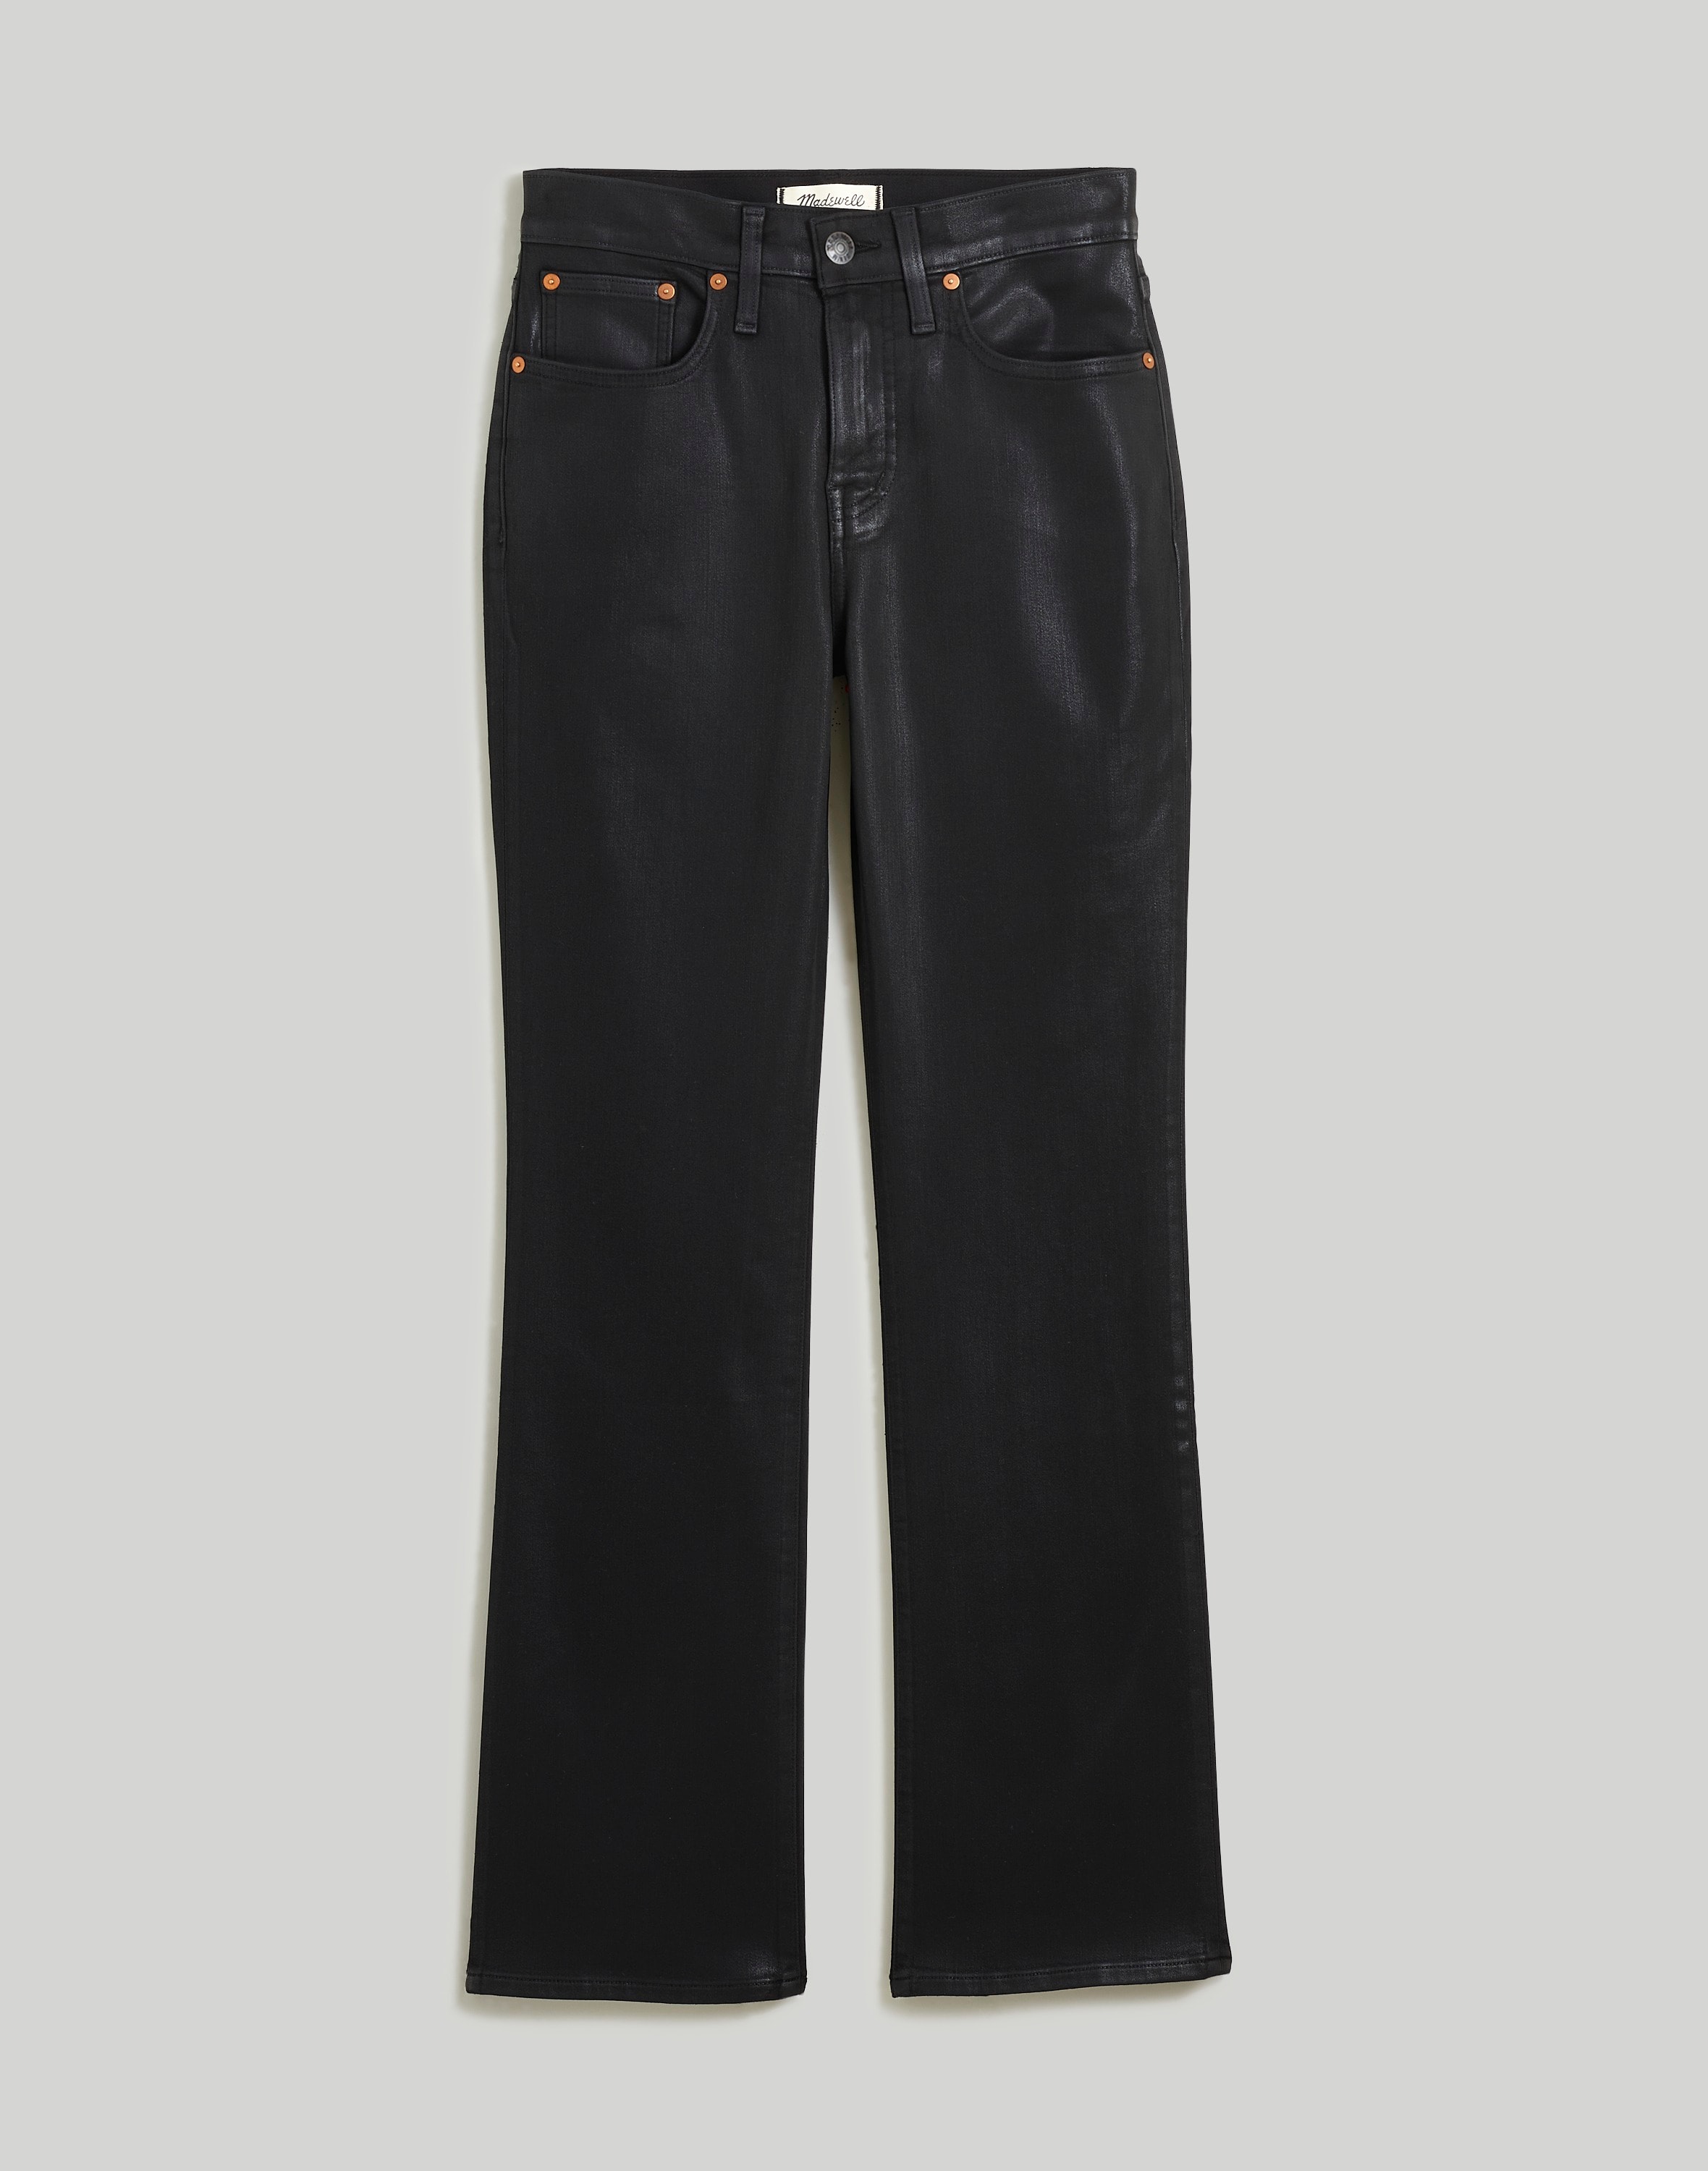 Kick Out Crop Jeans True Black Wash: Coated Edition